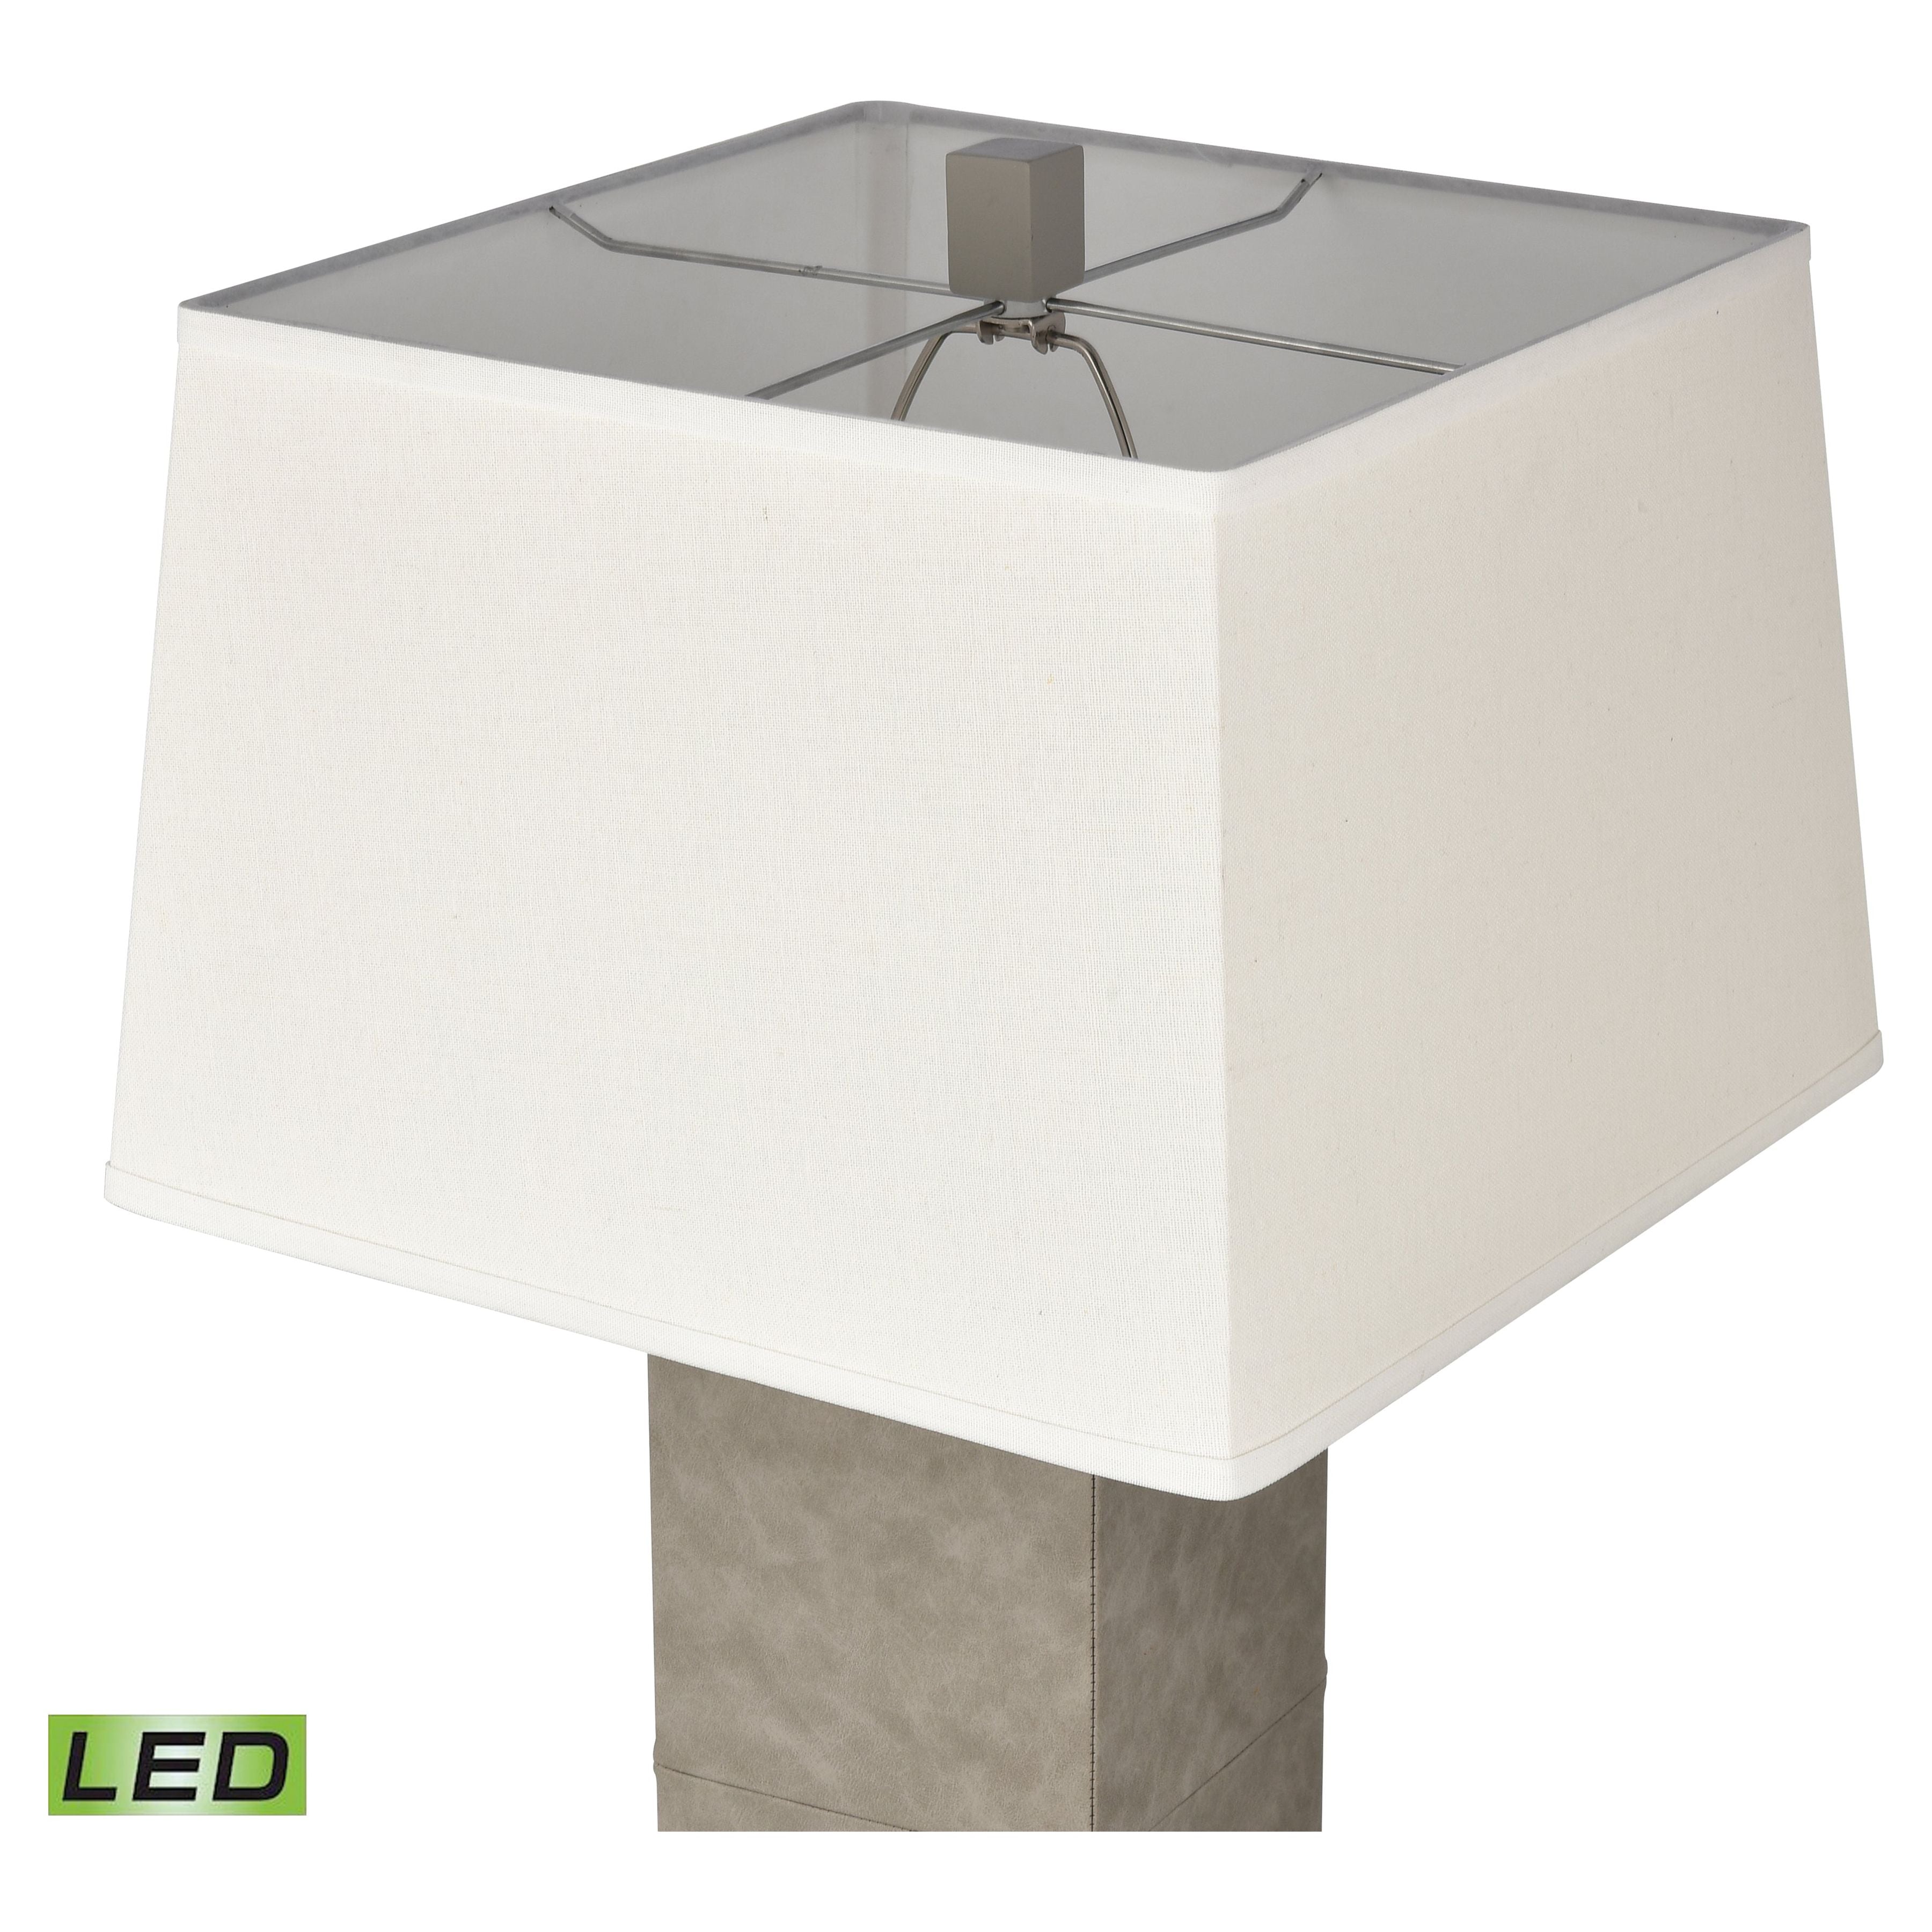 Unbound 32" High 1-Light Table Lamp